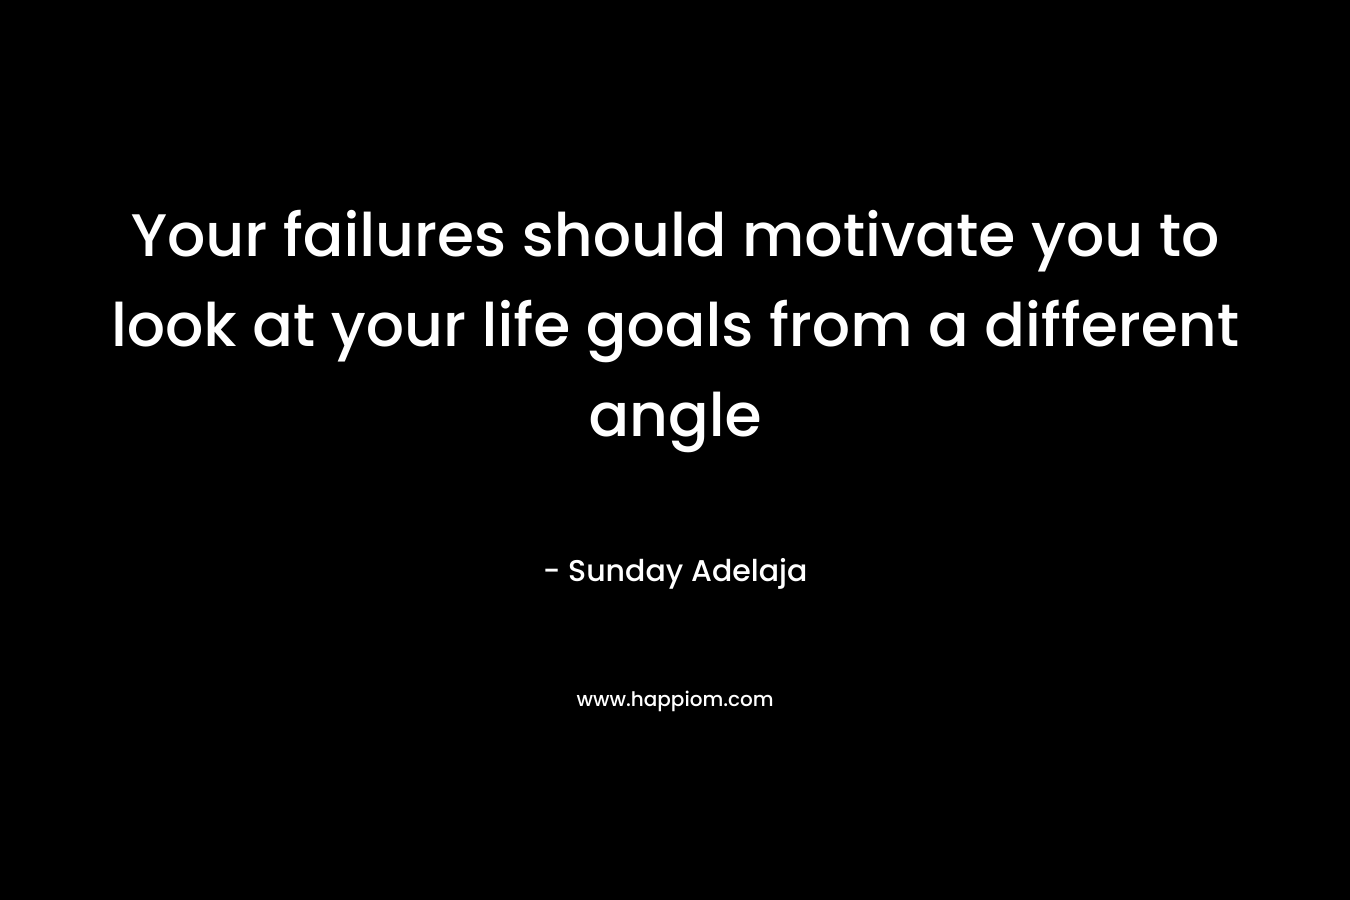 Your failures should motivate you to look at your life goals from a different angle